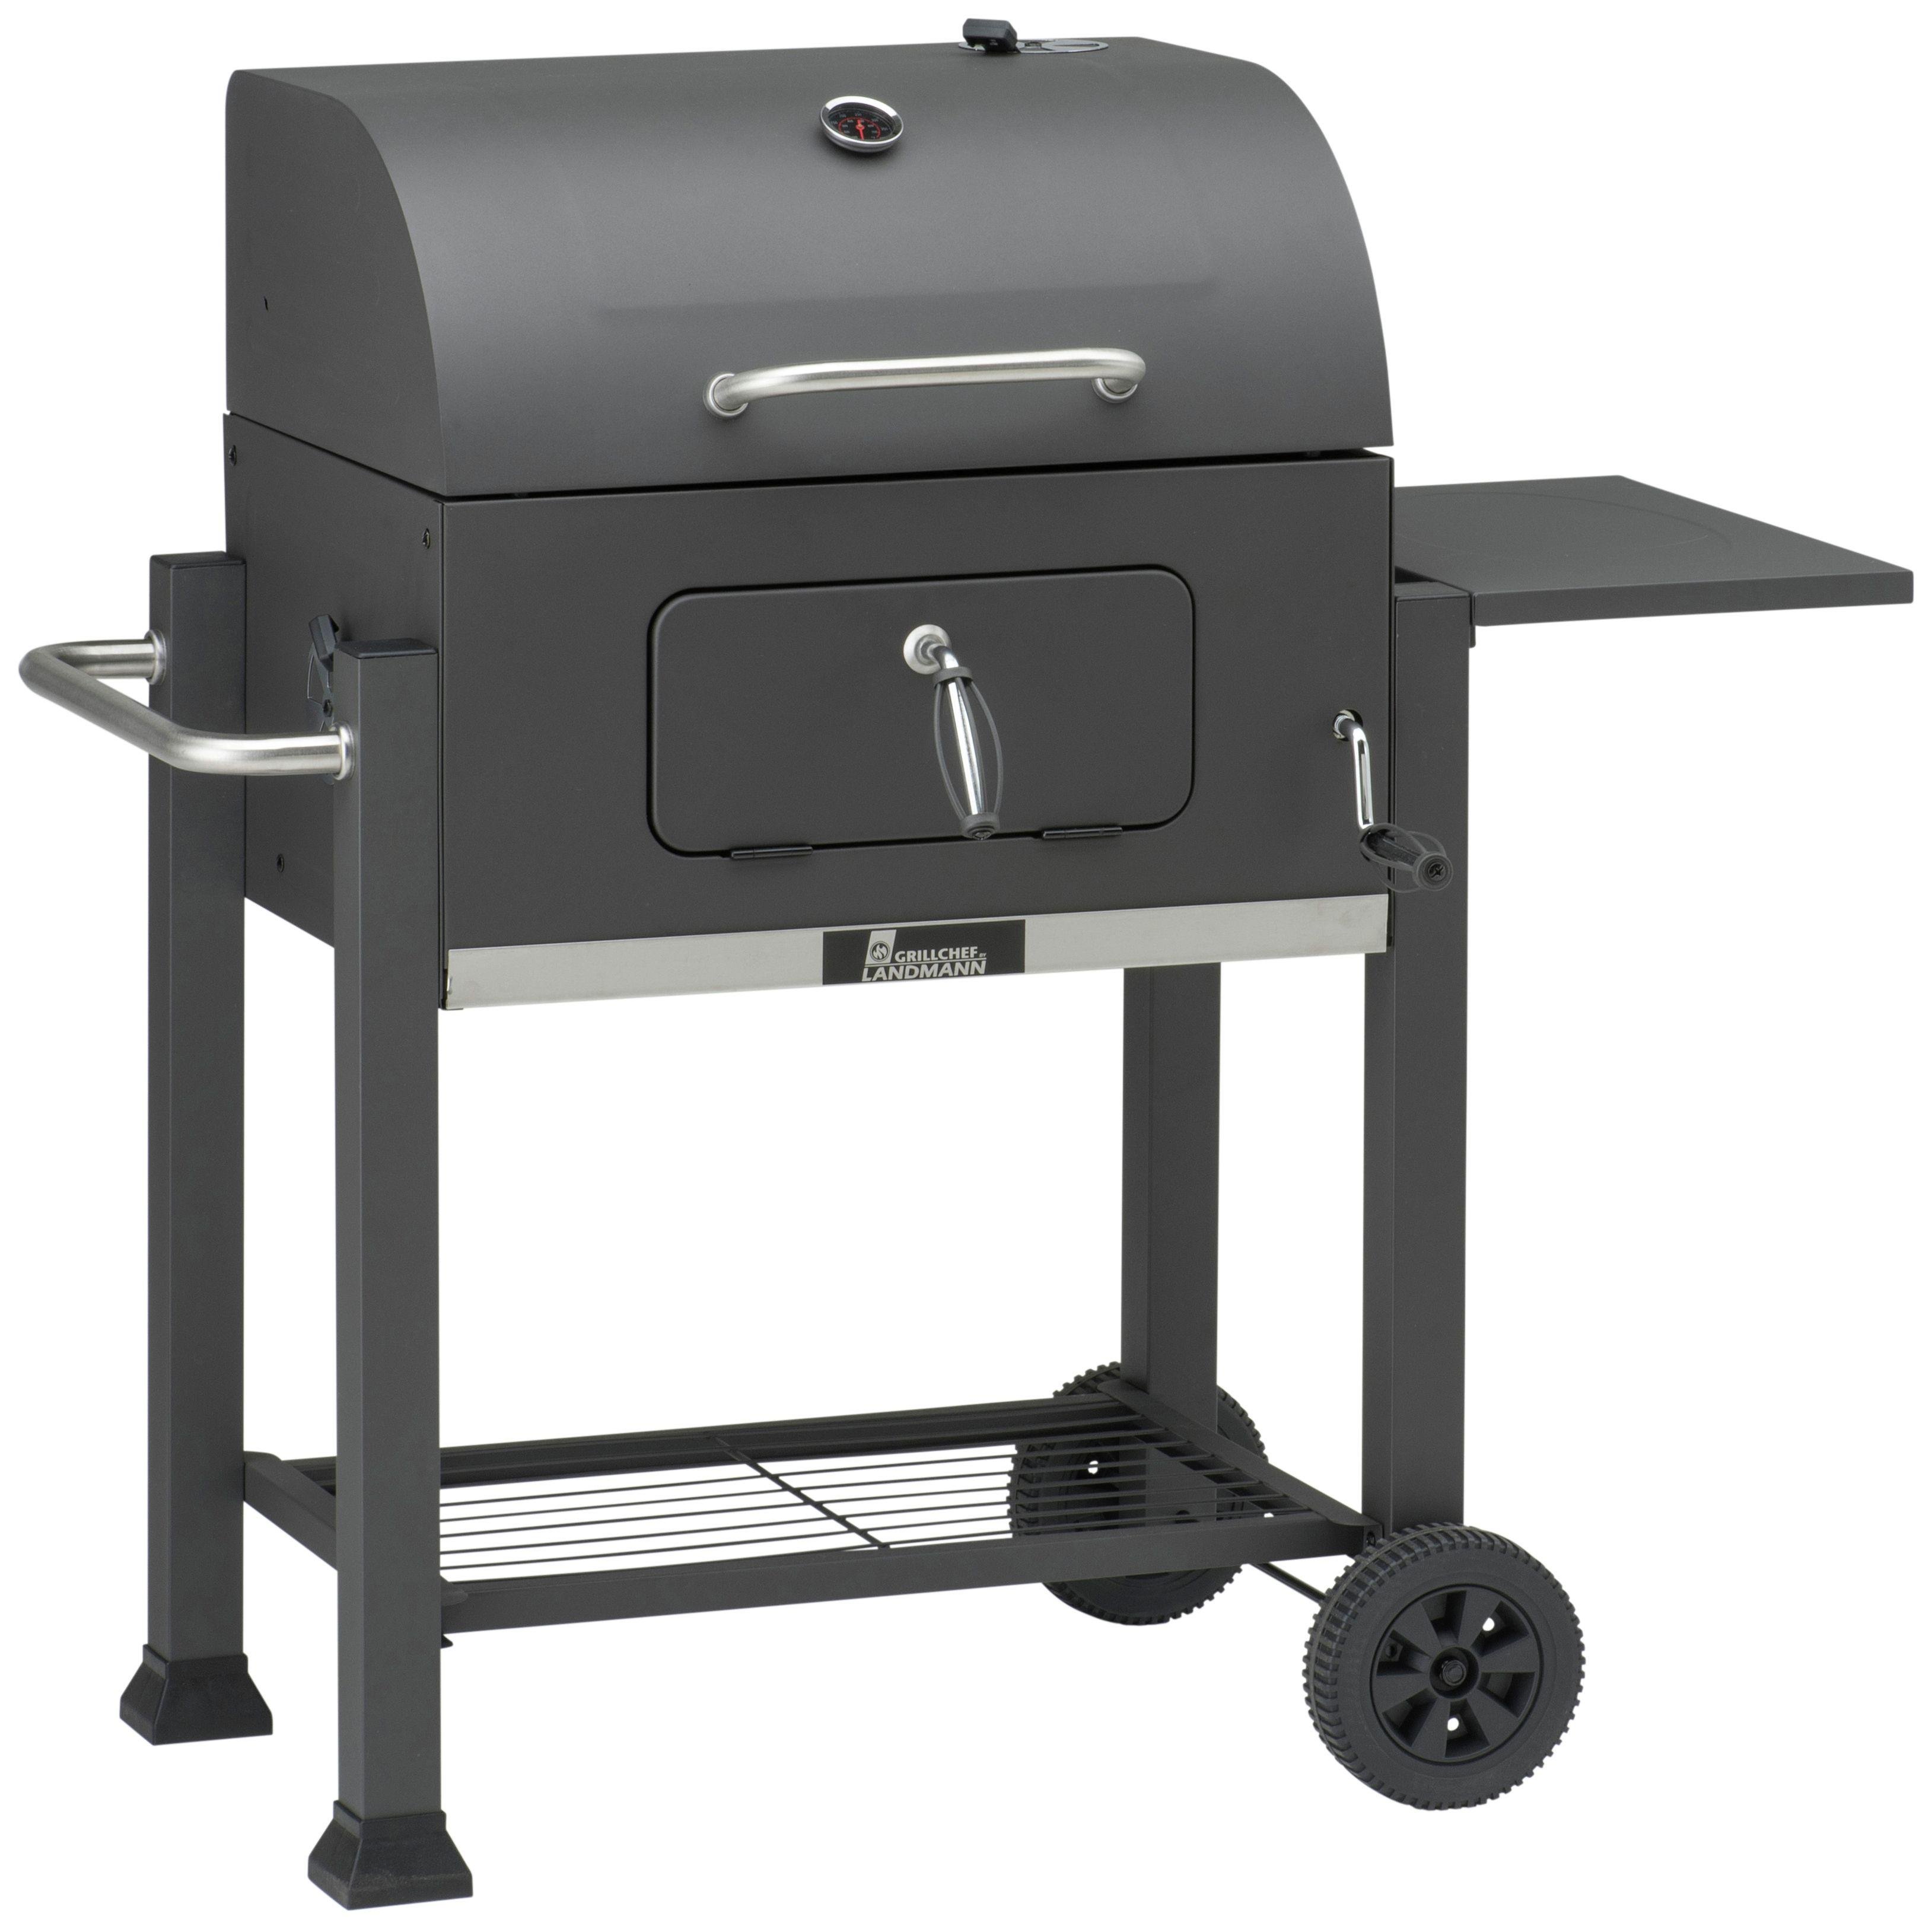 Landmann Grill Chef Tennessee Charcoal Broiler